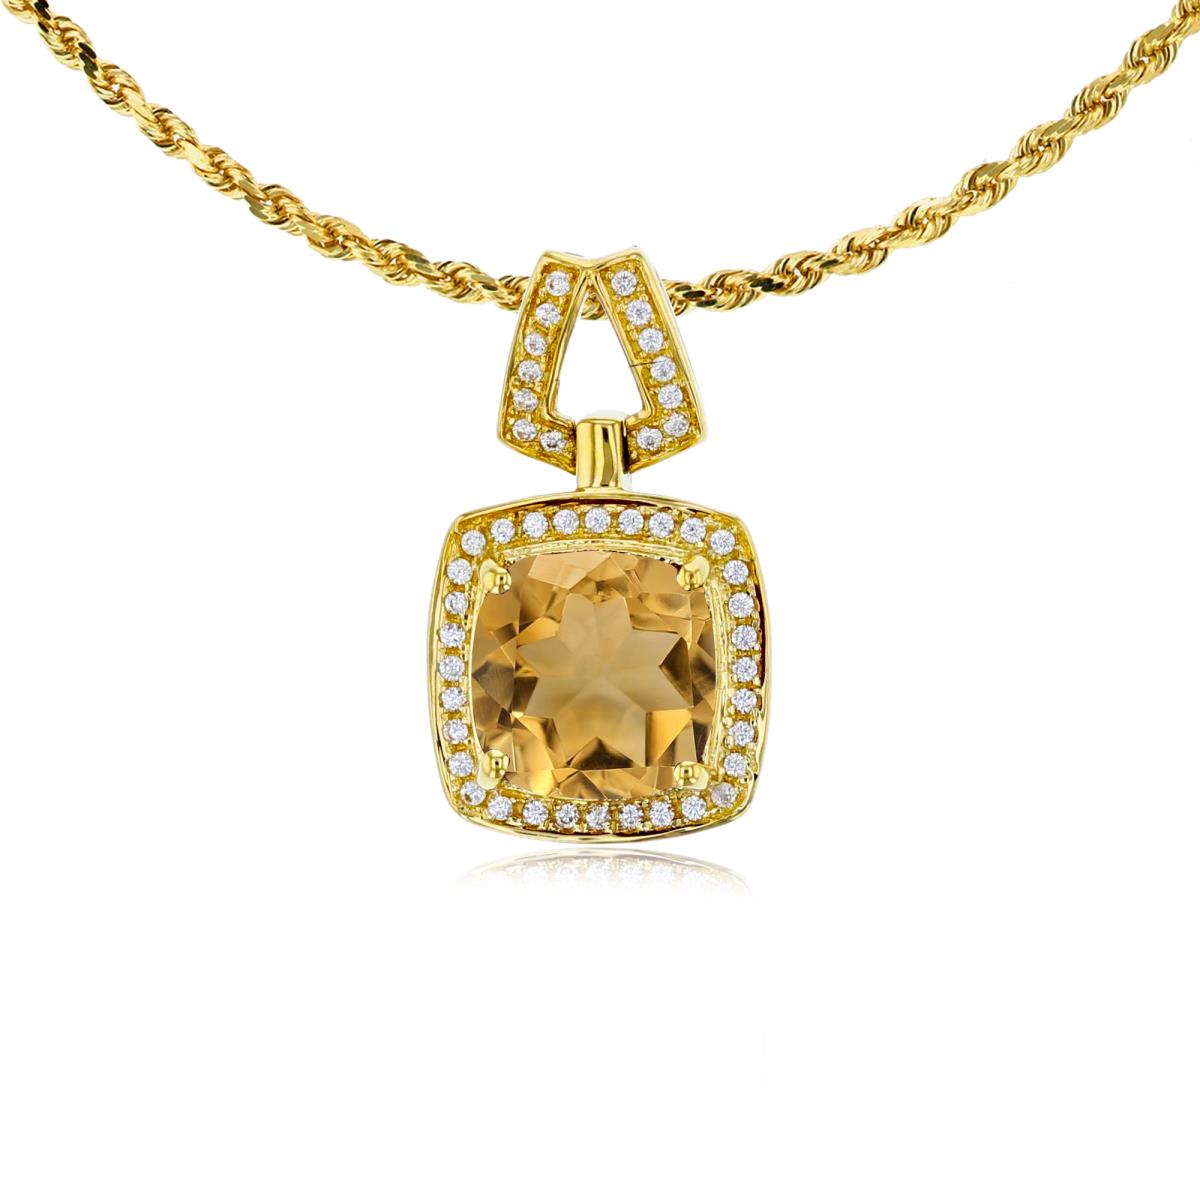 10K Yellow Gold 7mm Cushion Citrine & 0.10 CTTW Diamond Halo 18" Rope Chain Necklace